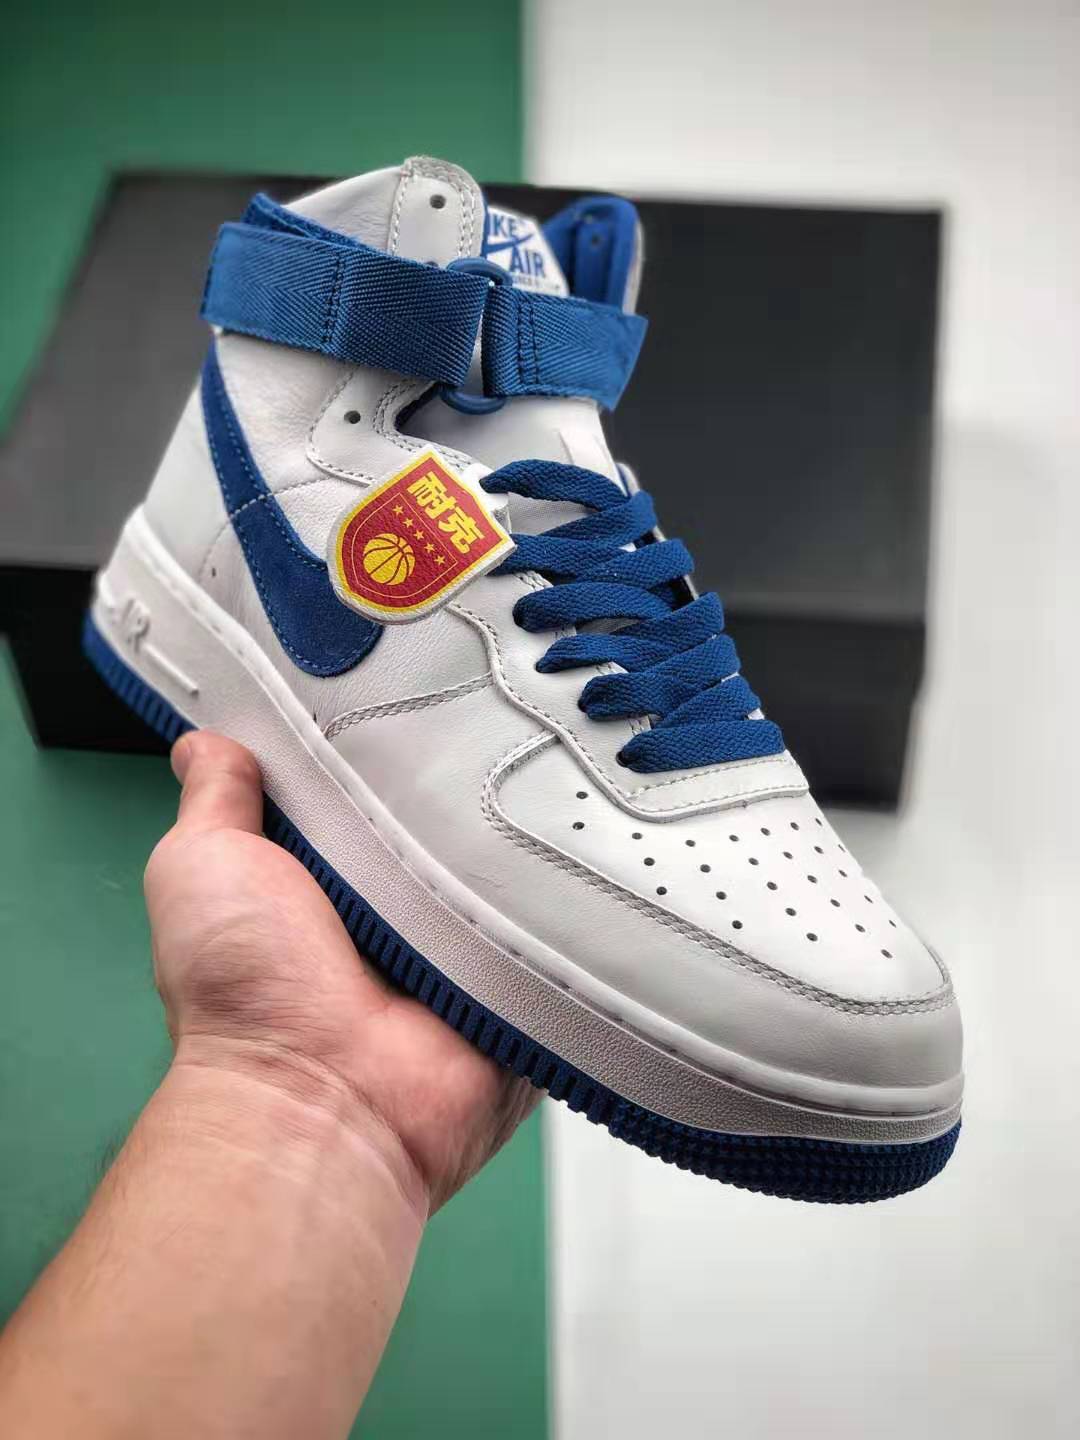 Nike Air Force 1 High White Game Royal Blue 743546-103 - Limited Edition Sneaker